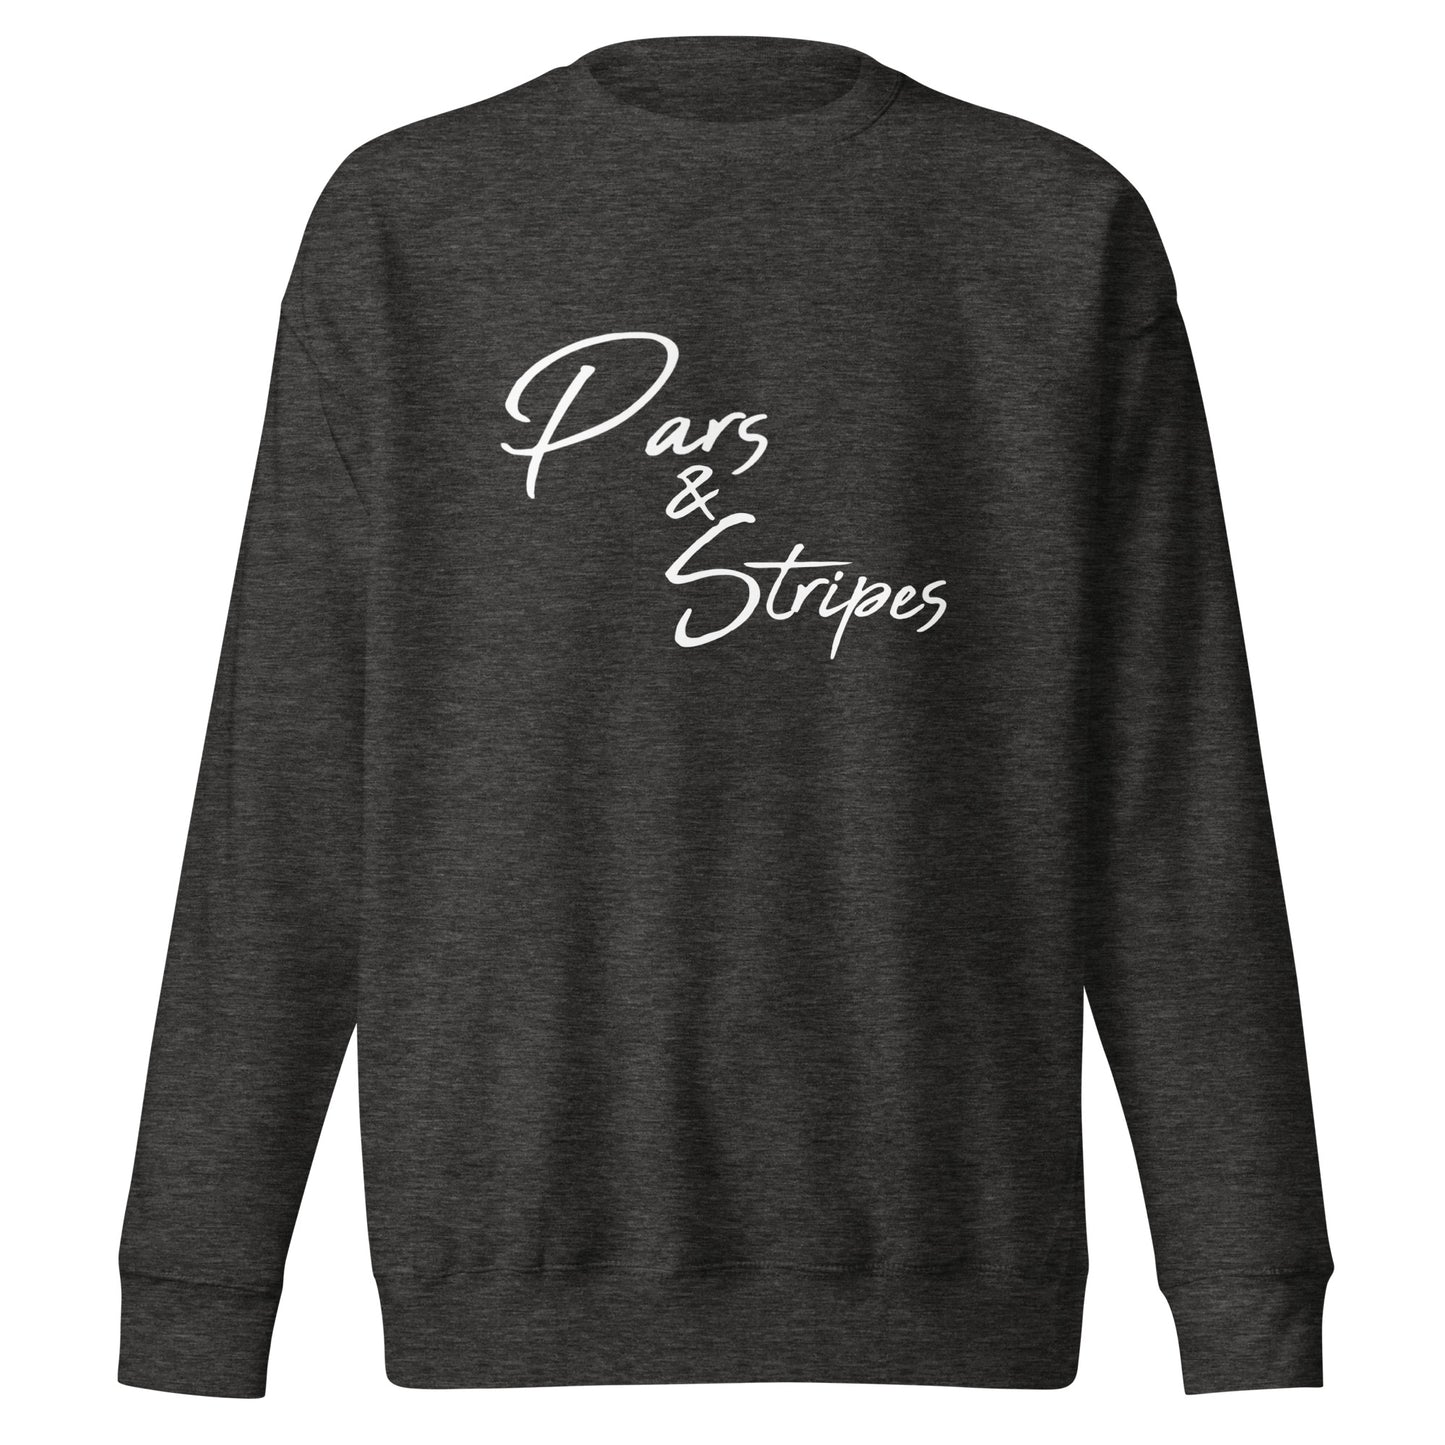 Pars and Stripes Crew Neck